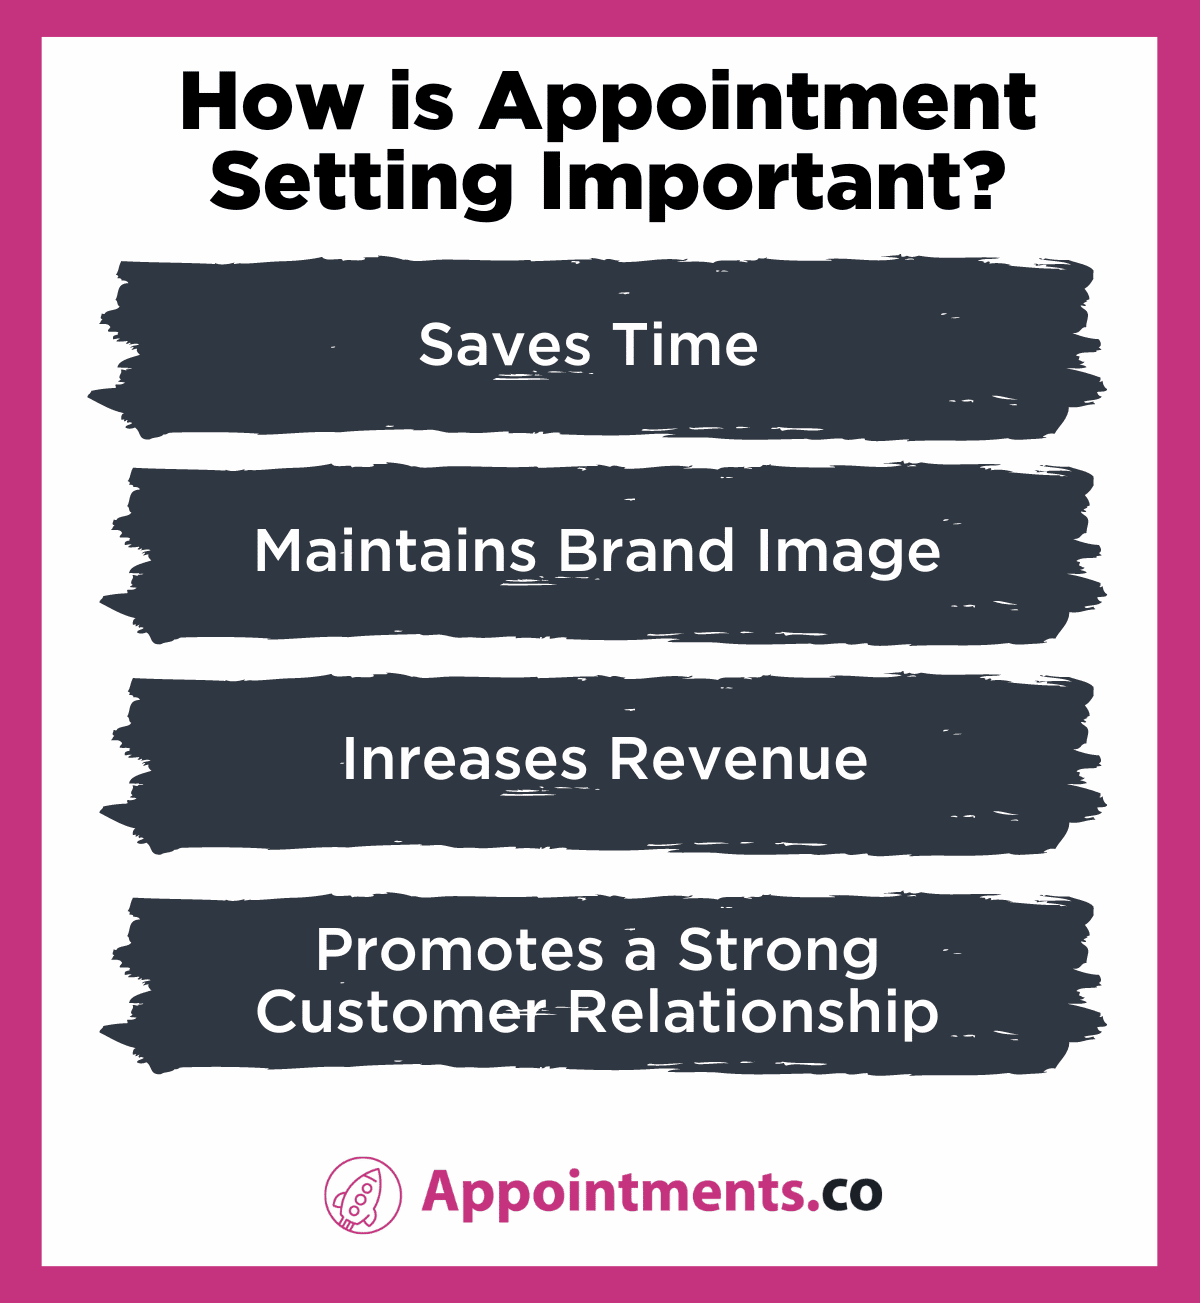 How is Appointment Setting Important